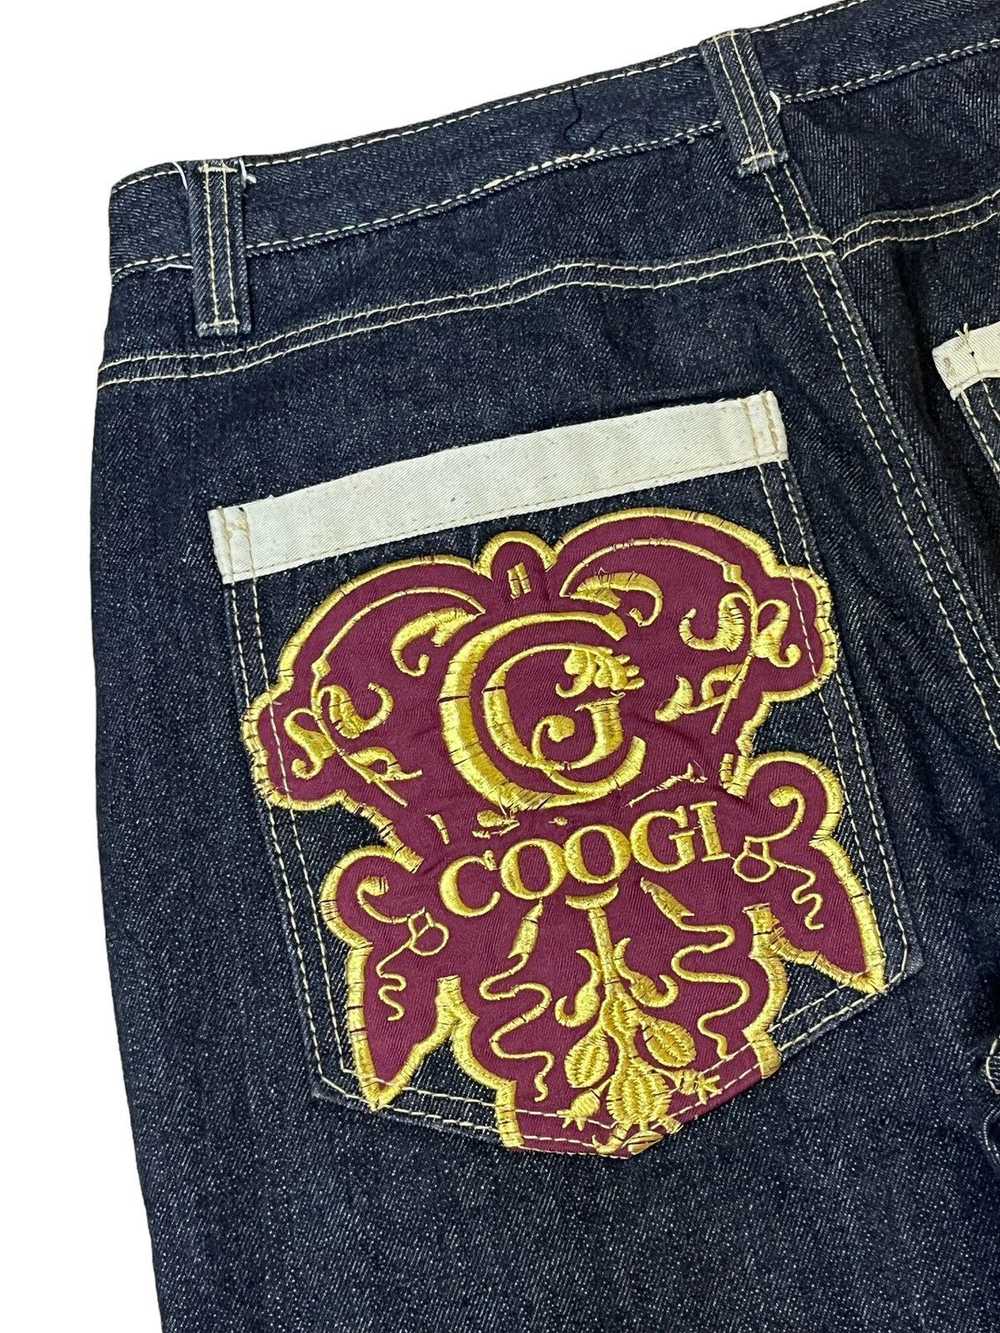 Archival Clothing × Coogi × Hysteric Glamour COOG… - image 10